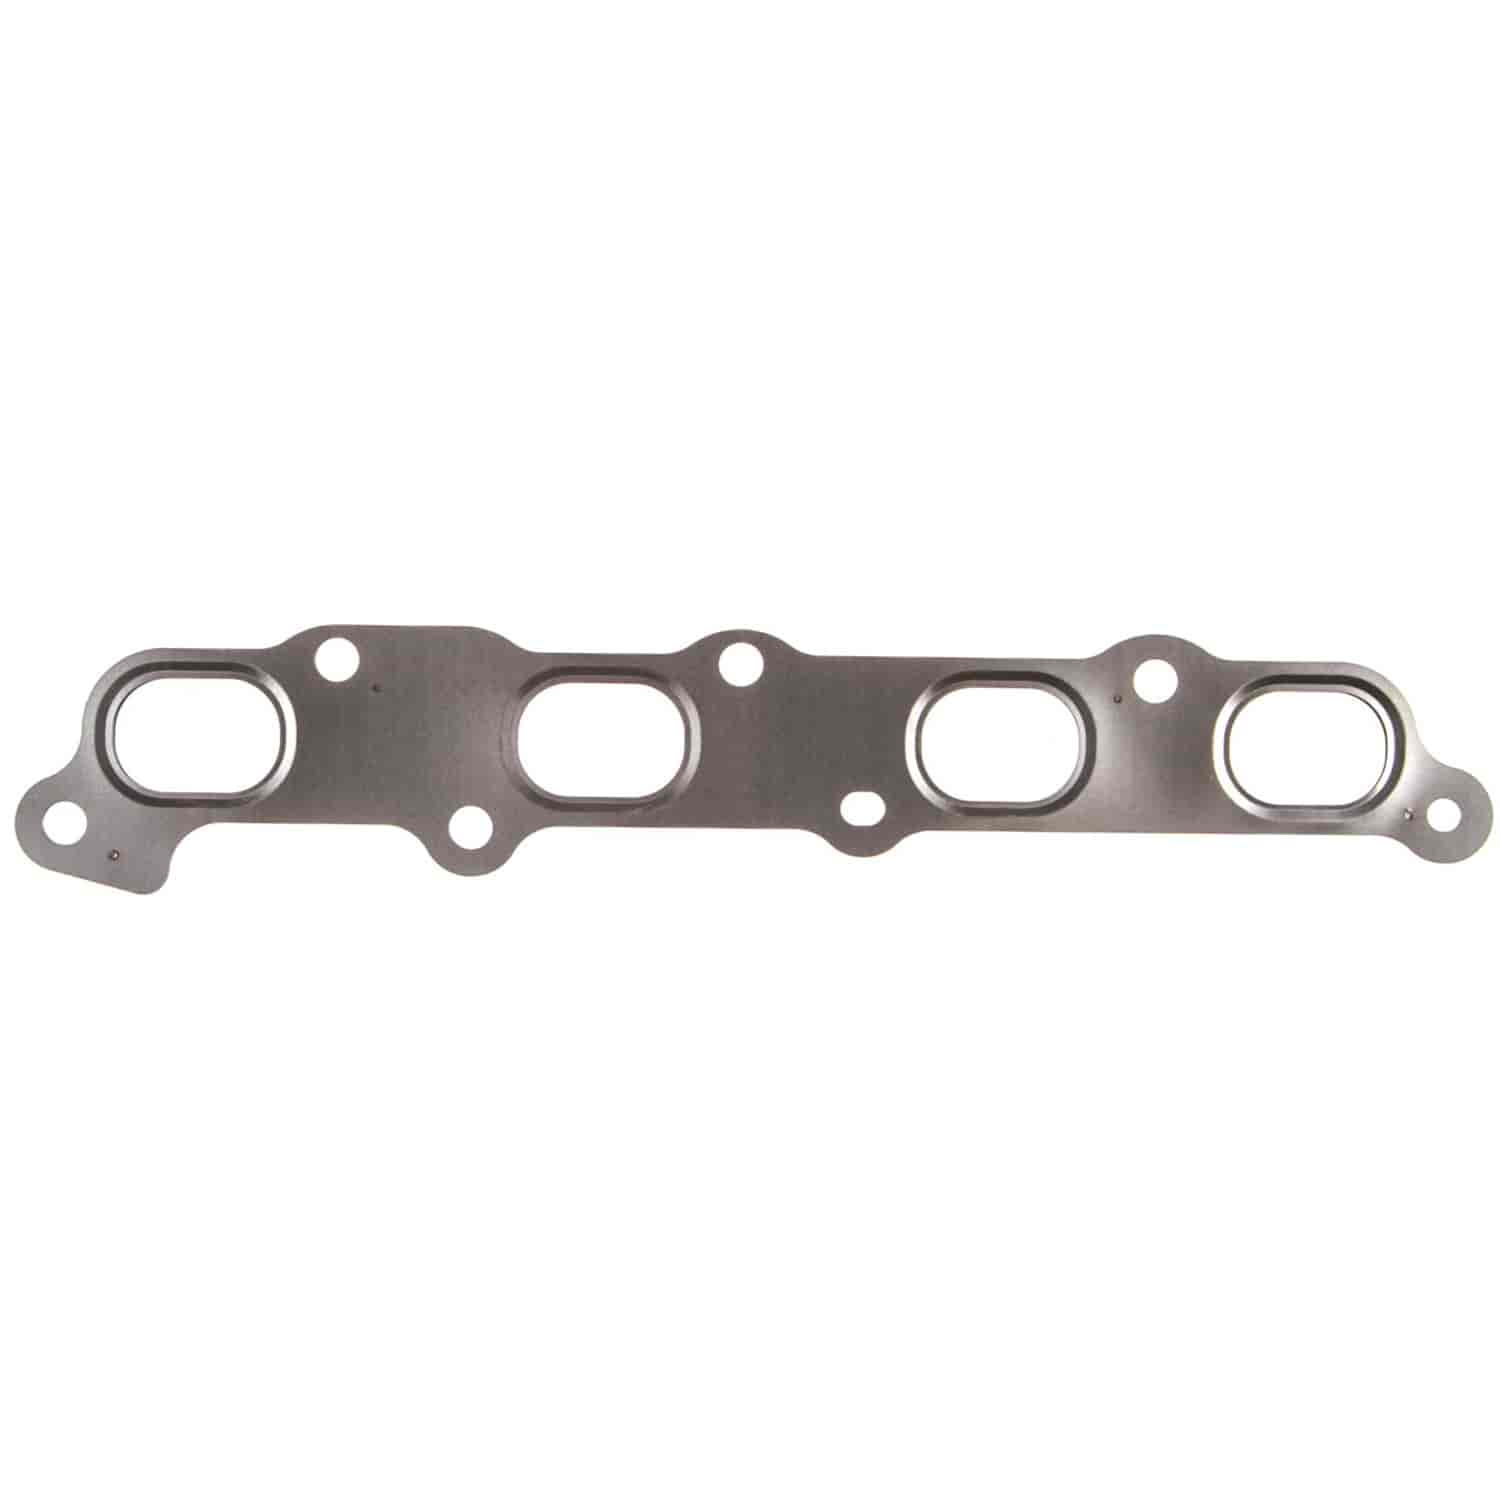 Exhaust Manifold Gasket 2004-2006 Chevy L4 2.8L